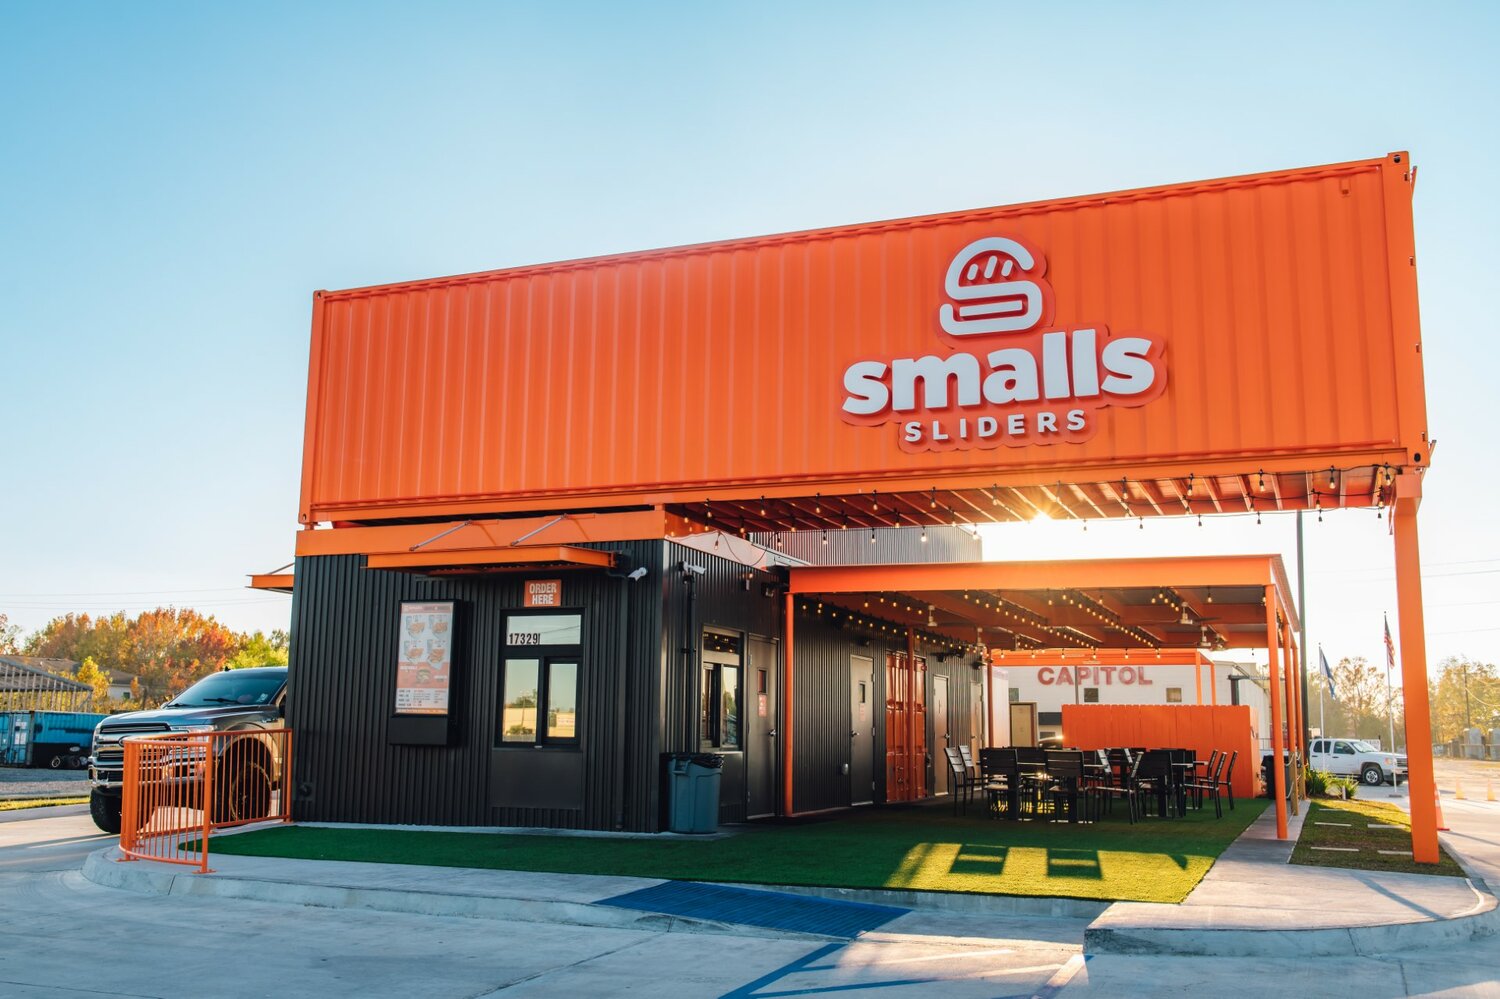 Smalls Sliders is a concept developed in modular recycled buildings that company officials call "cans."